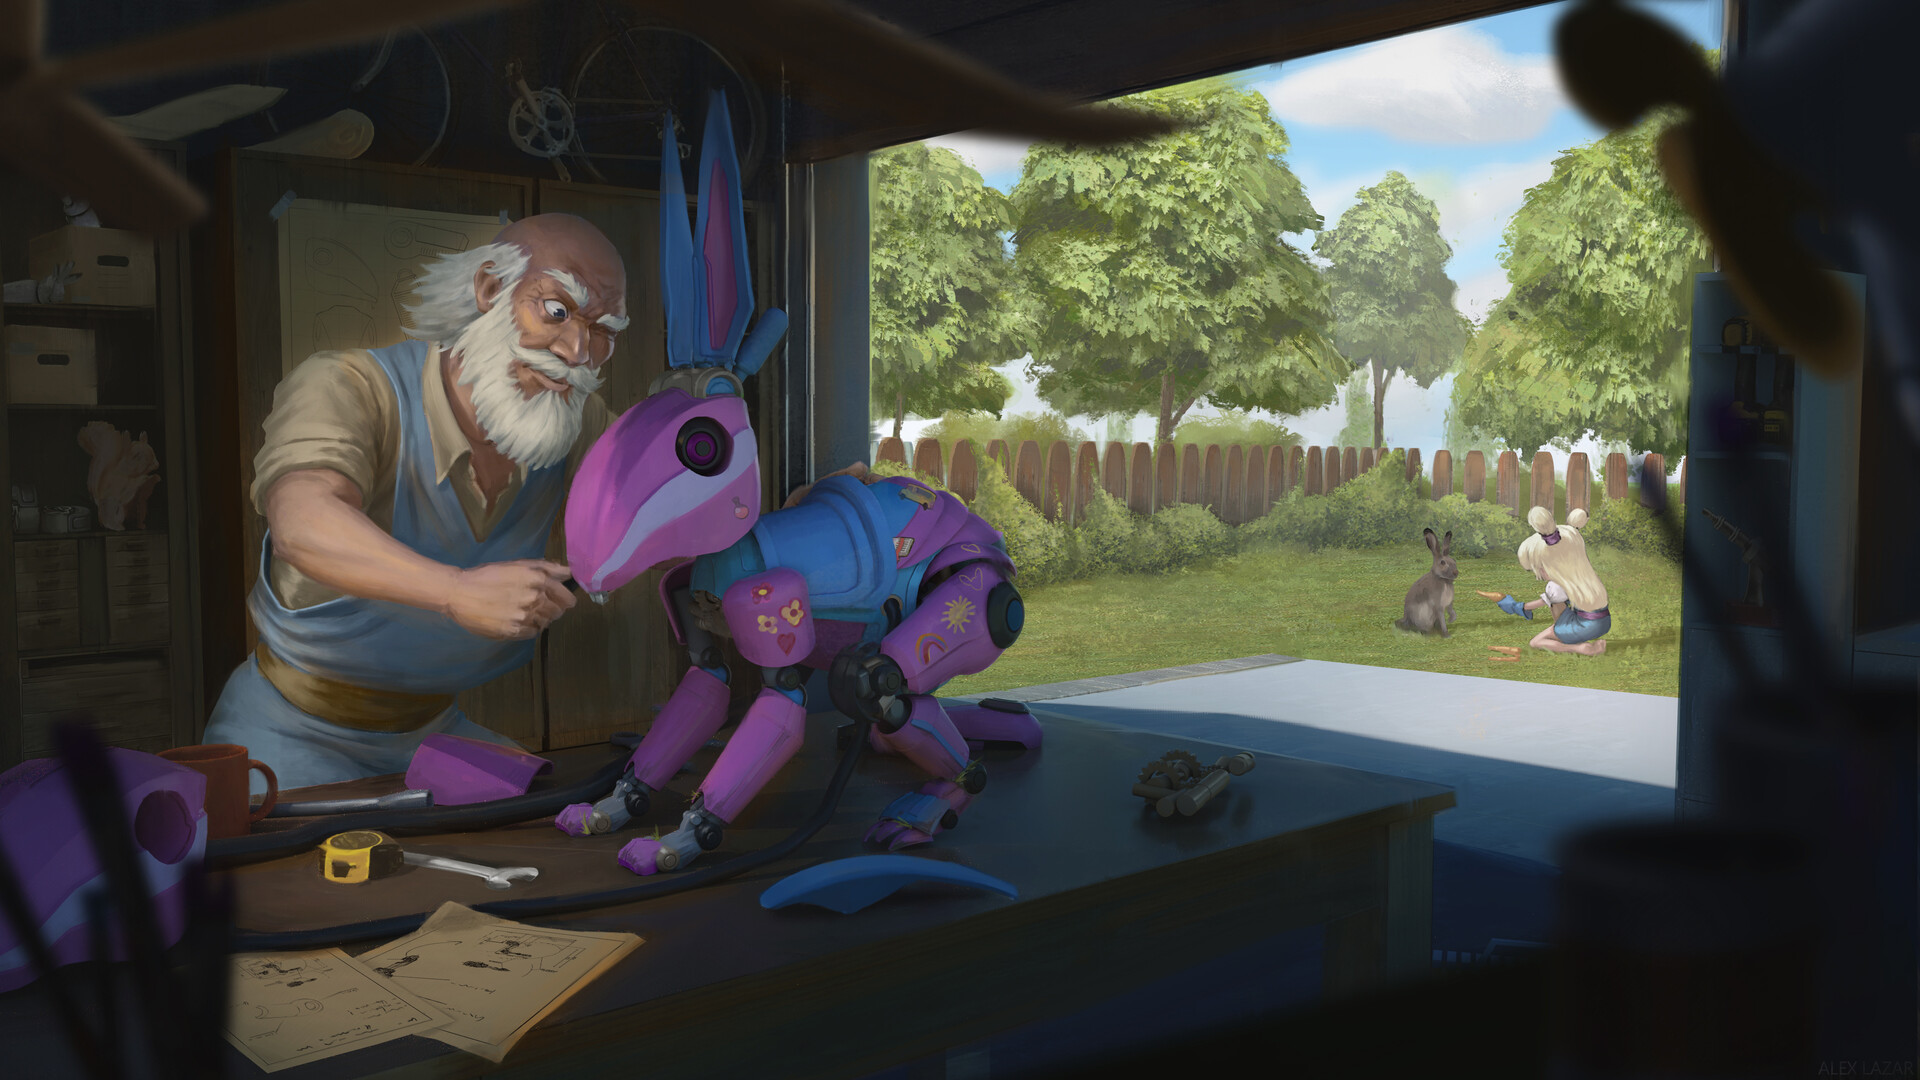 Gift from Grandpa by Alex Lazar